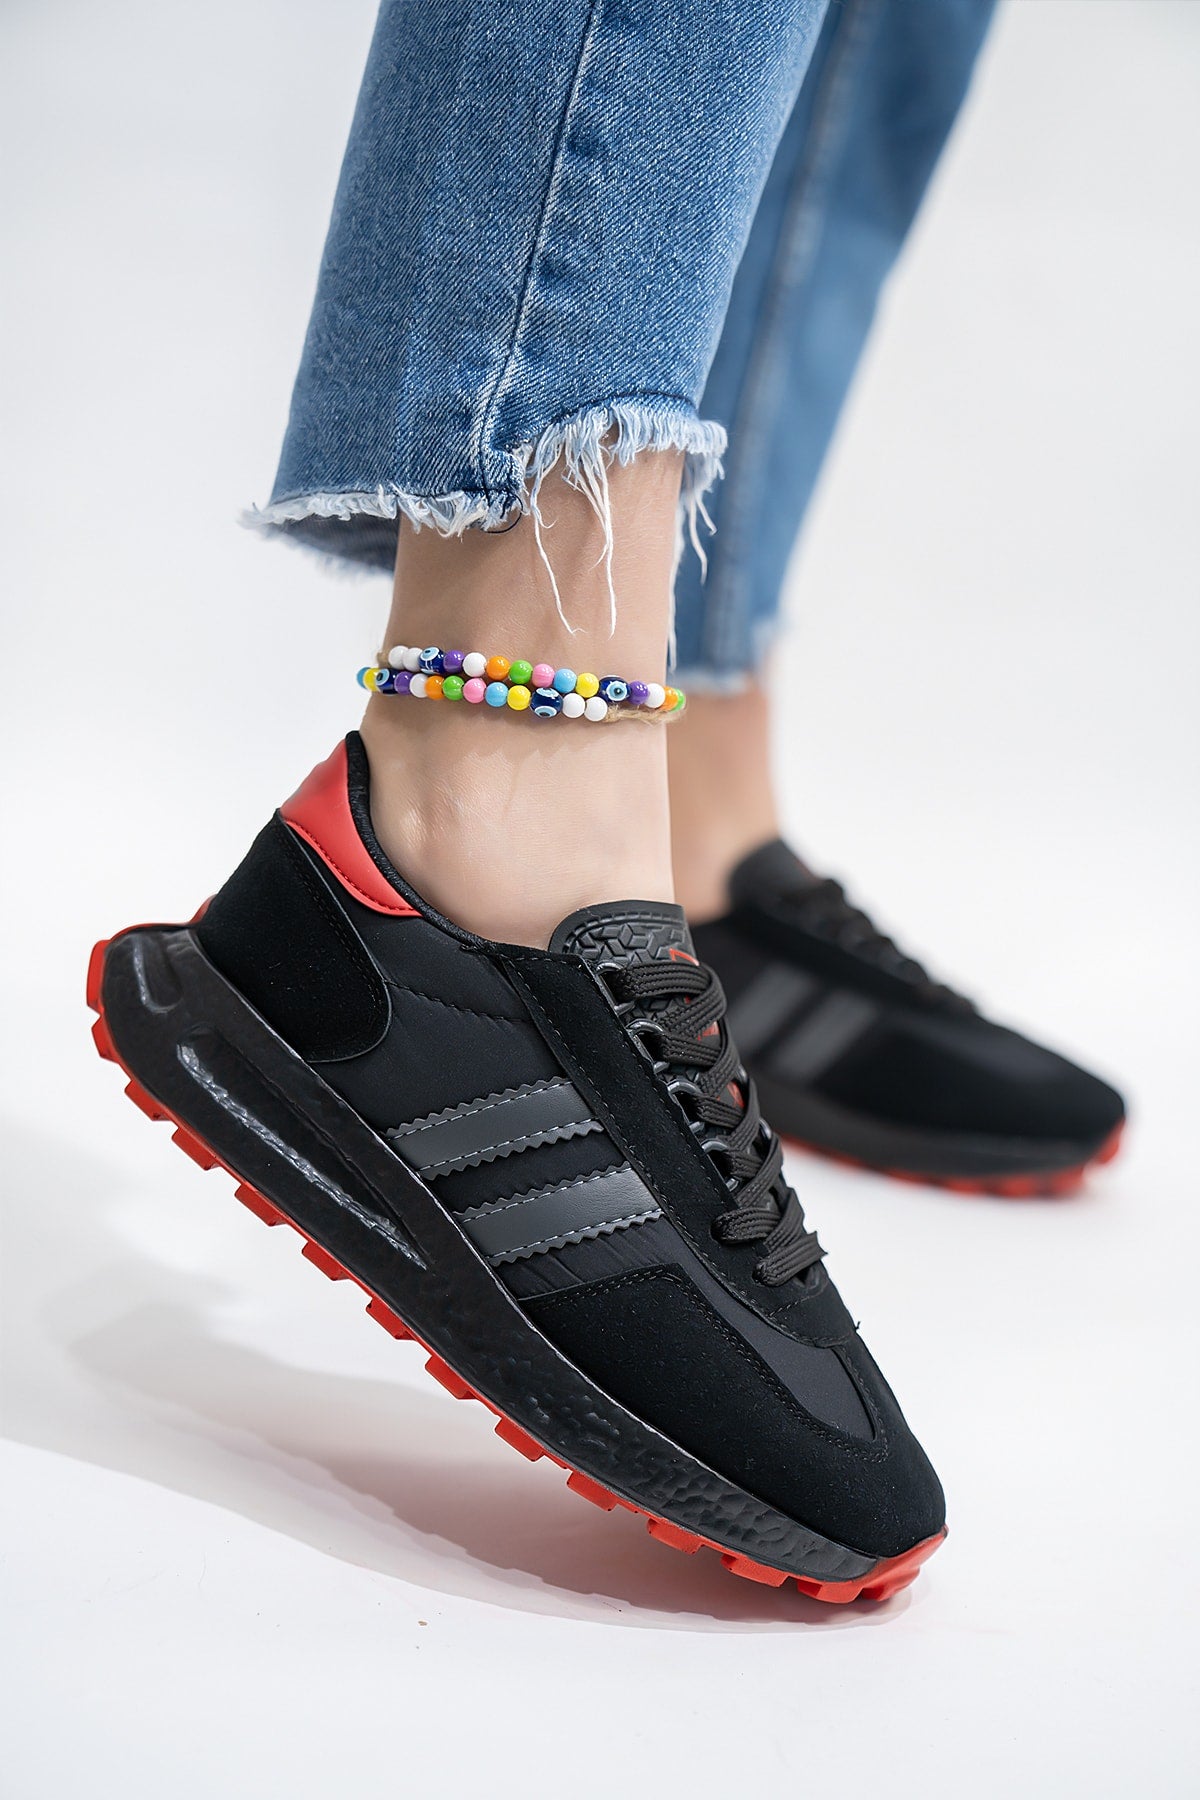 Unisex Snkr Black Red Casual Casual Sports Shoes Sneaker